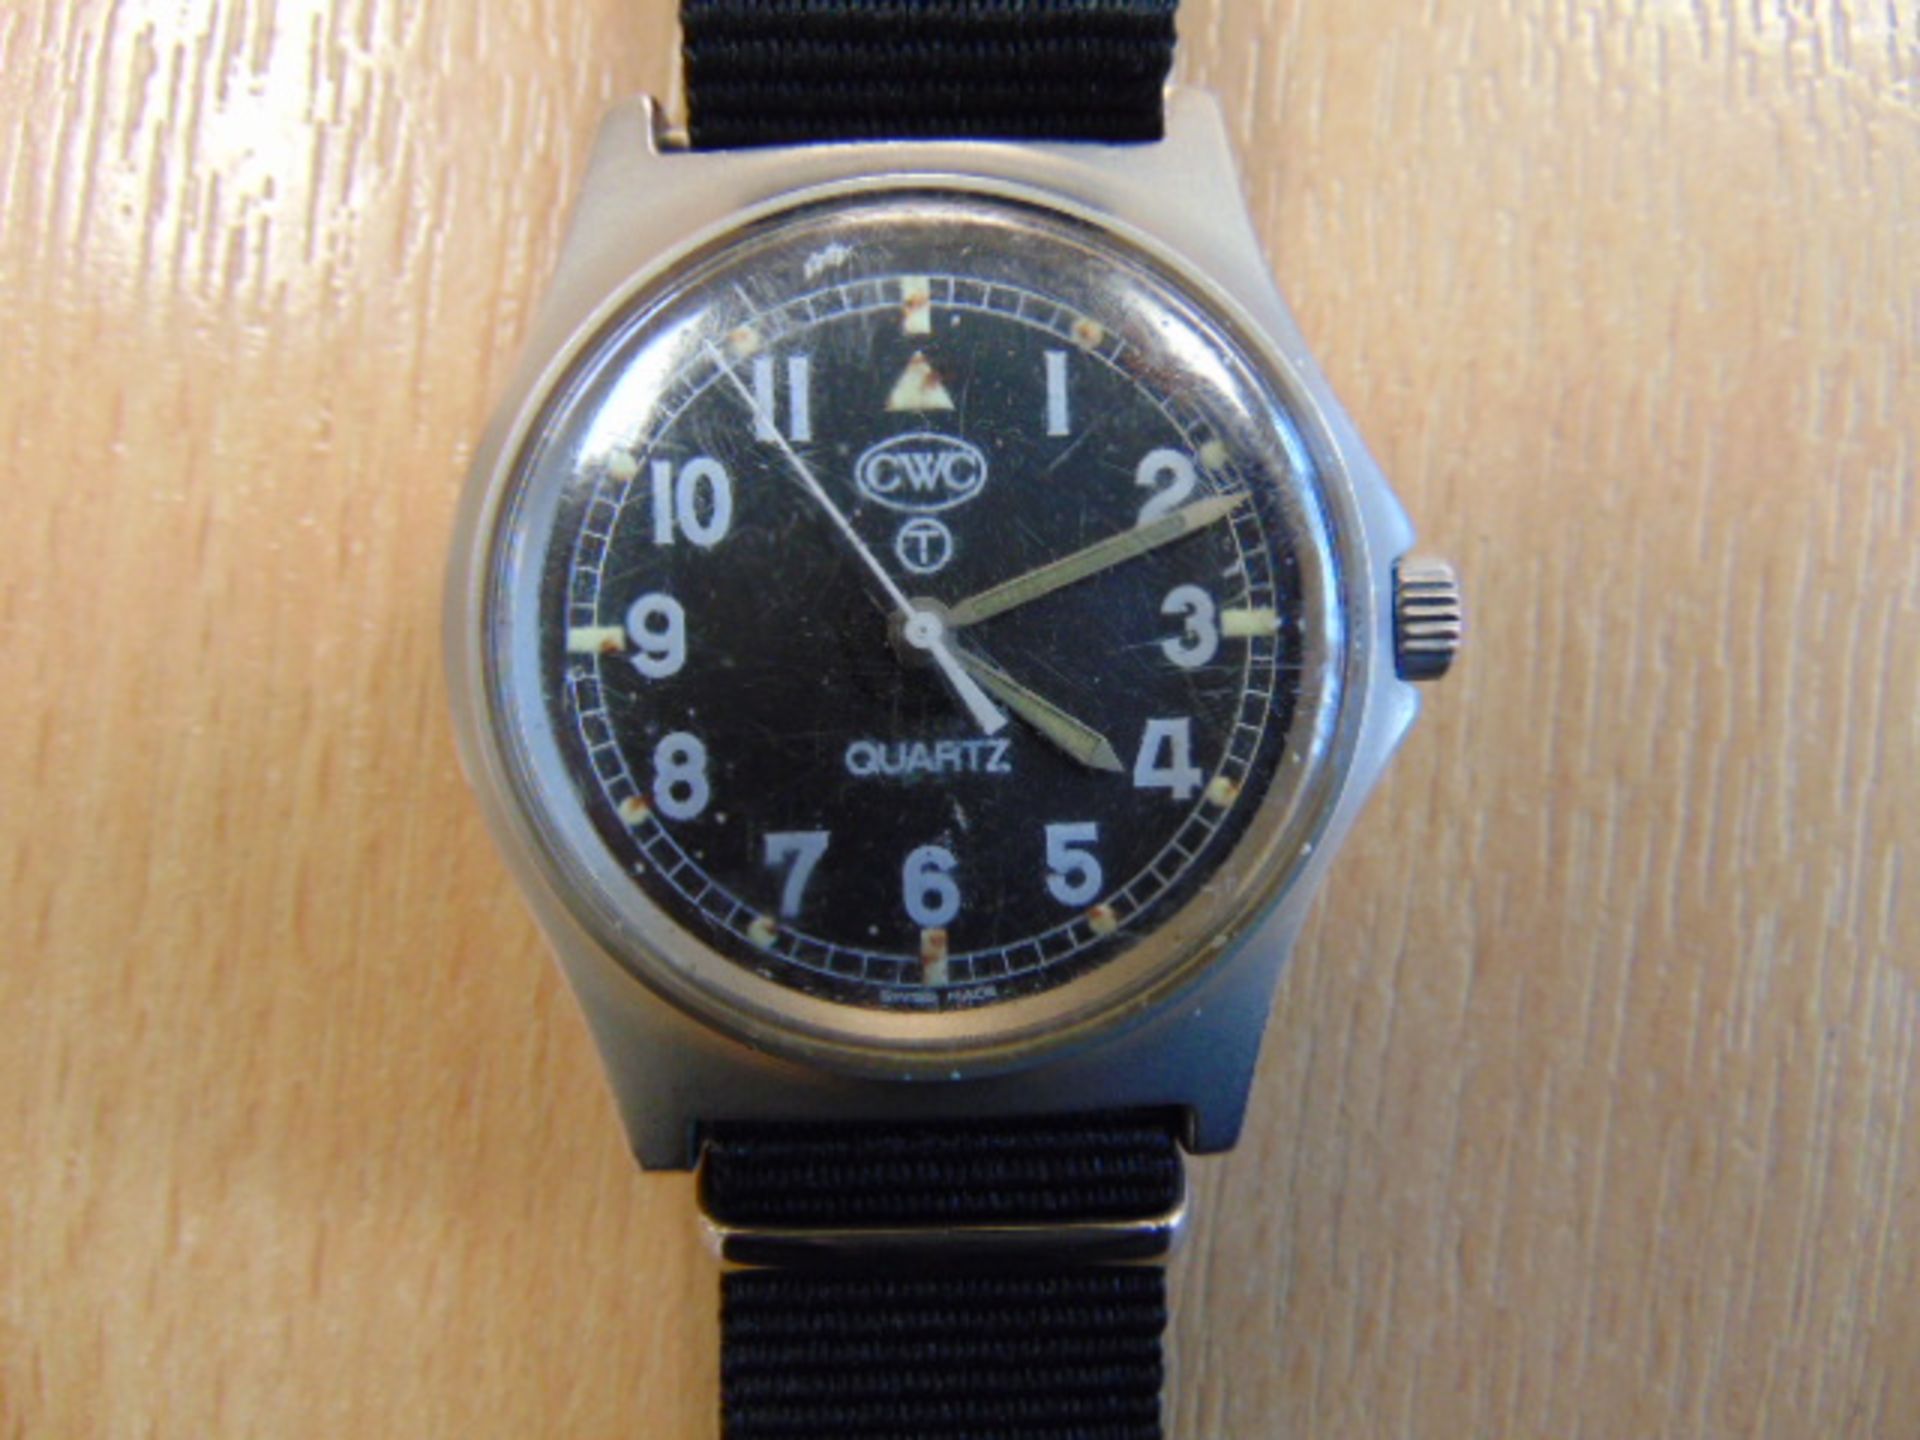 CWC 0552 ROYAL MARINES/ NAVY ISSUE SERVICE WATCH DATED 1990 (GULF WAR) - Image 3 of 7